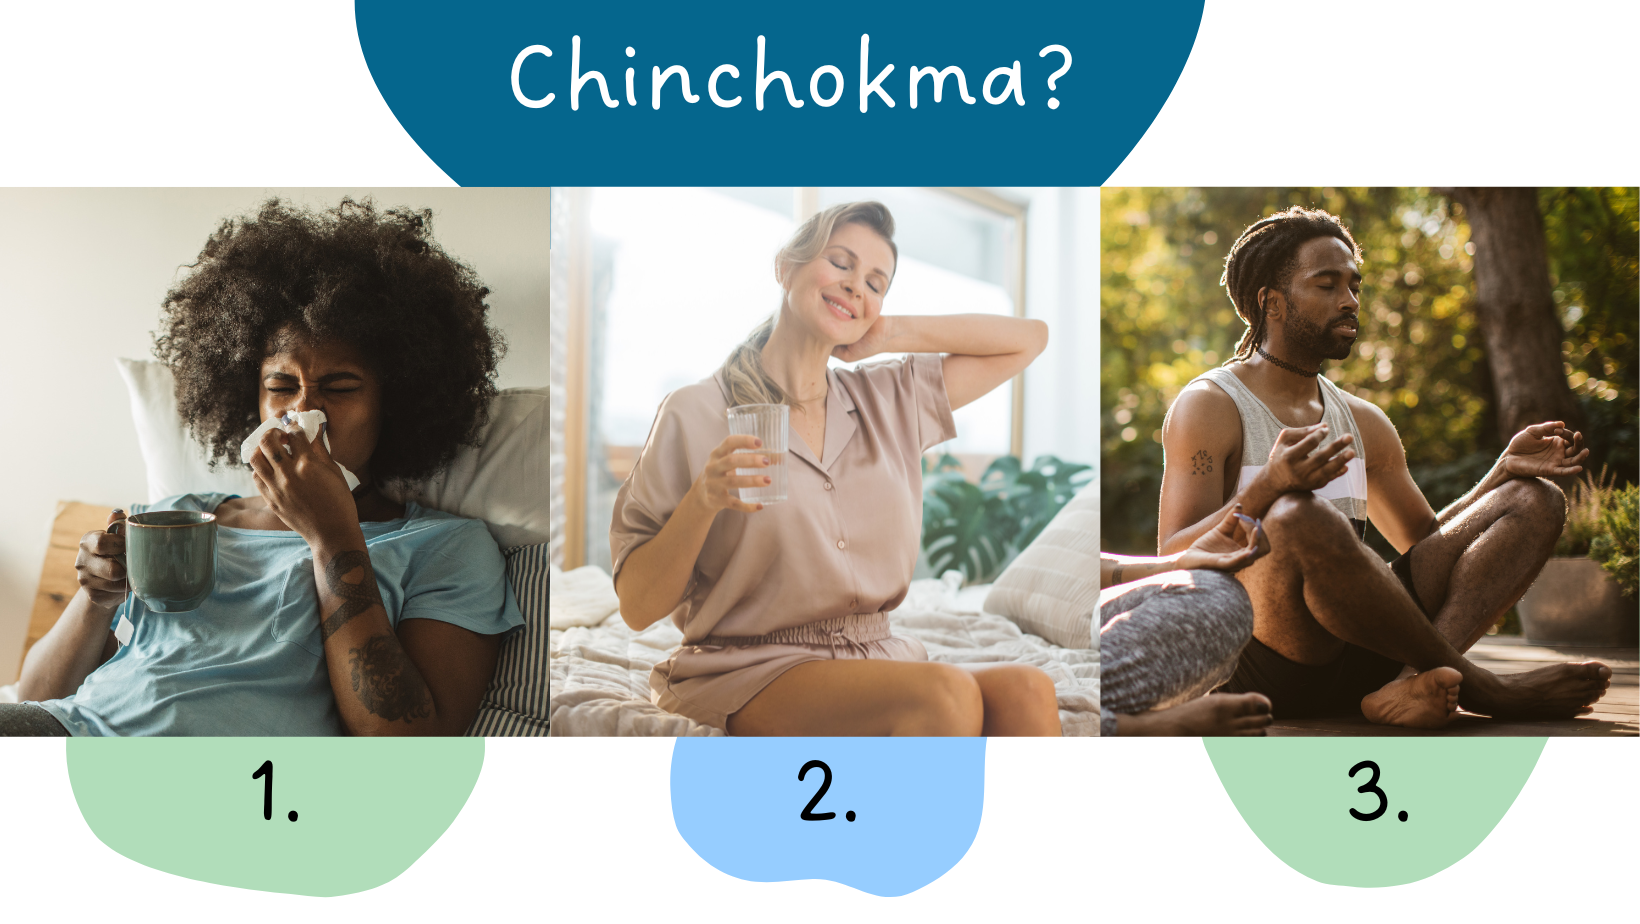 Three labeled photographs. Above them is the title 'Chinchokma?' The photo labeled 1. is of a woman leaning back  in bed with a mug of tea, wiping her nose with a tissue and squinting. The photo labeled 2. is of a woman sitting up with a glass of water. She is smiling and stretching. The photo labeled 3. is of a man sitting outside. He is meditating with his eyes closed.